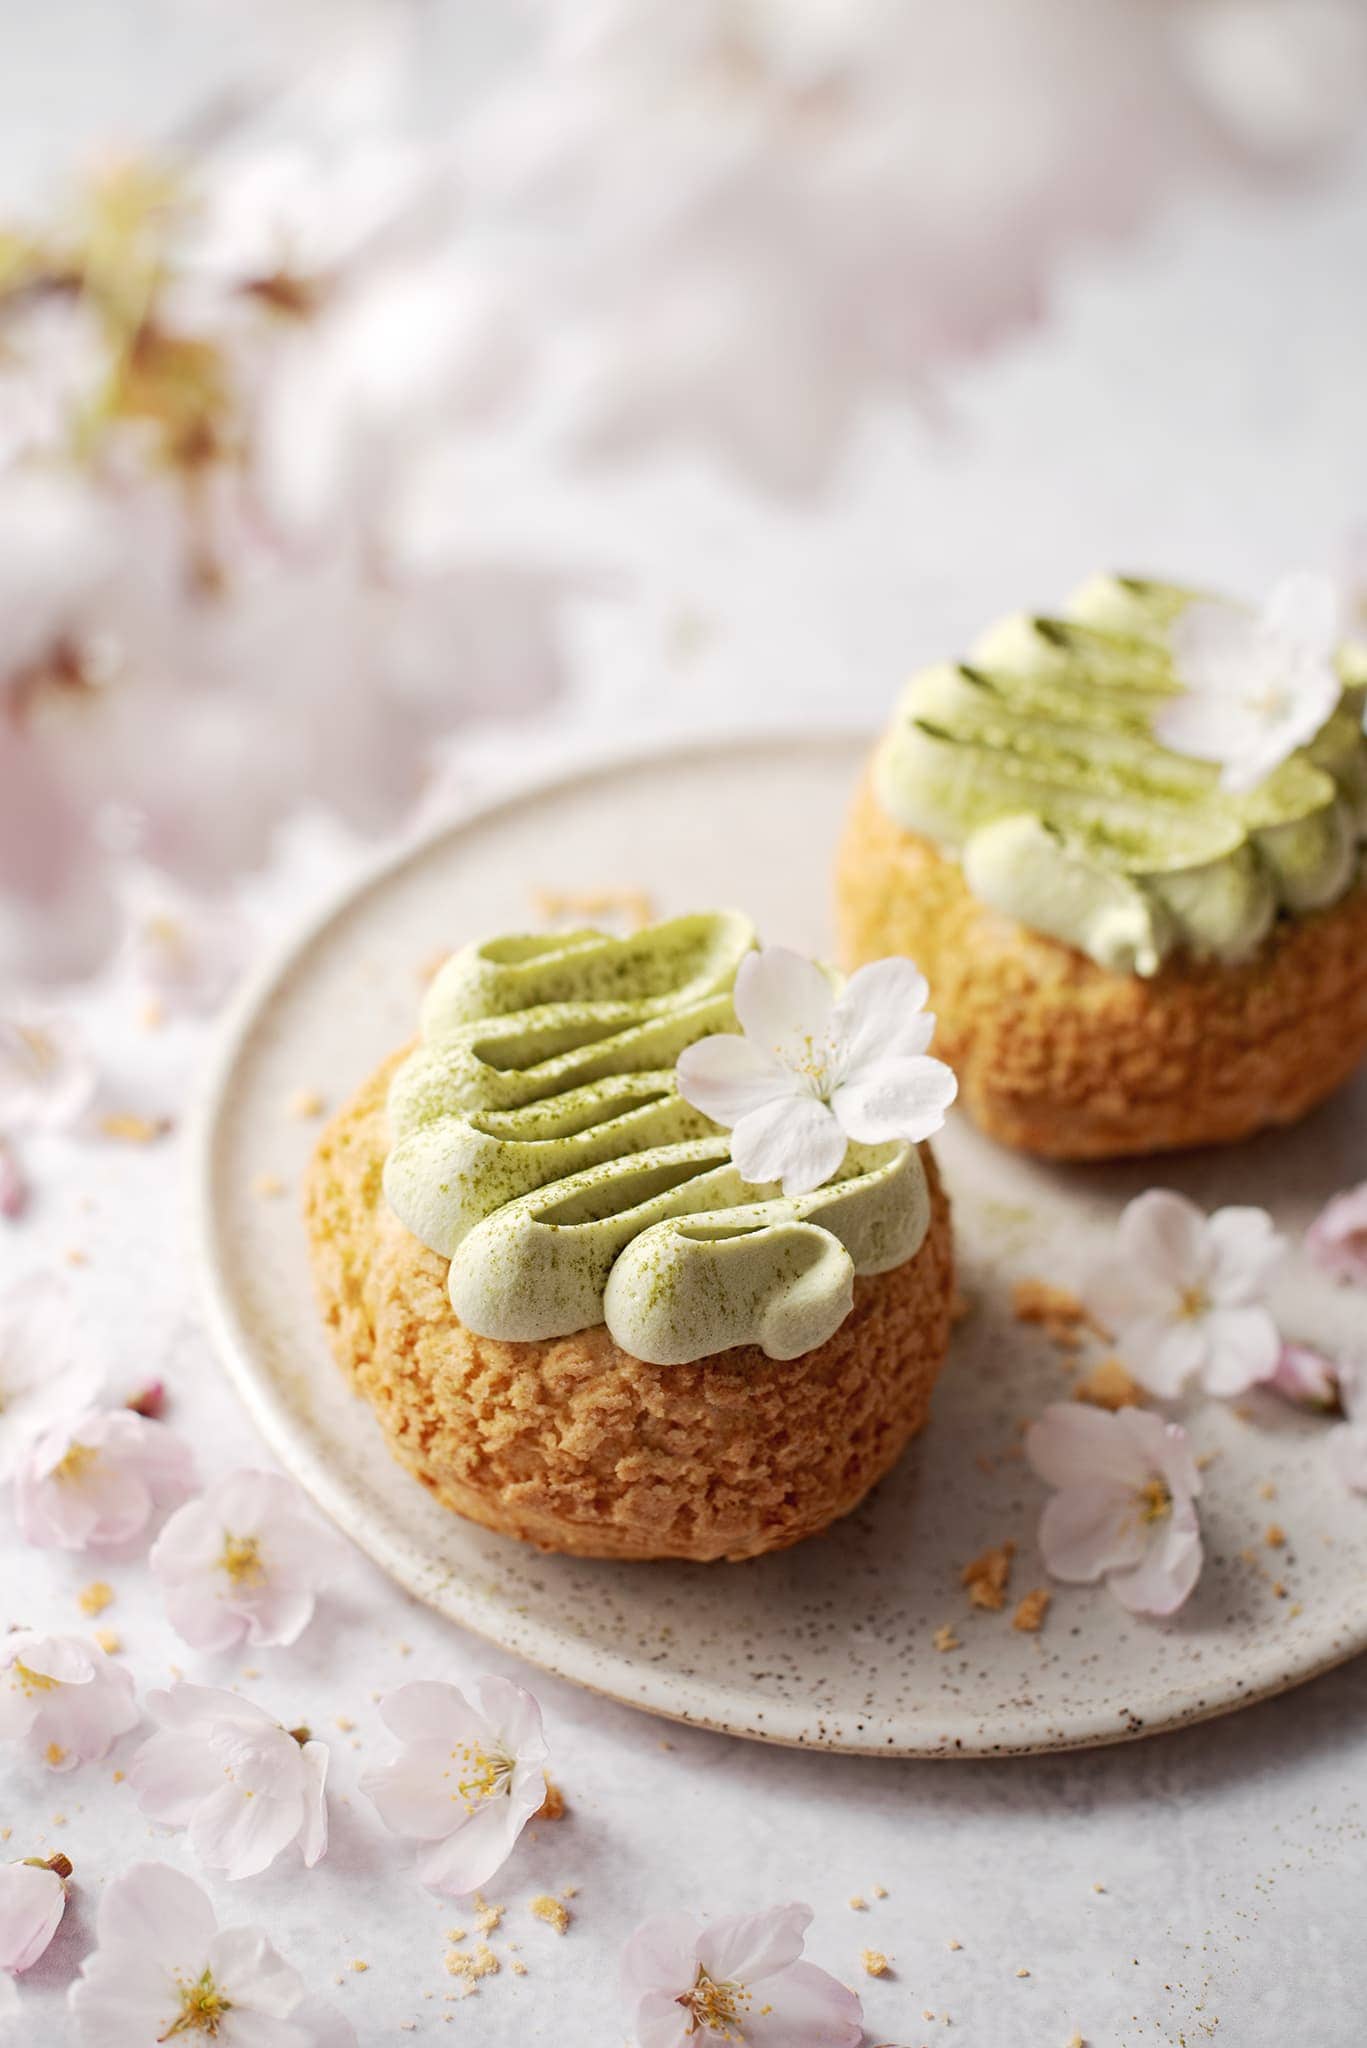 Matcha cream puffs surrounded by cherry blossoms